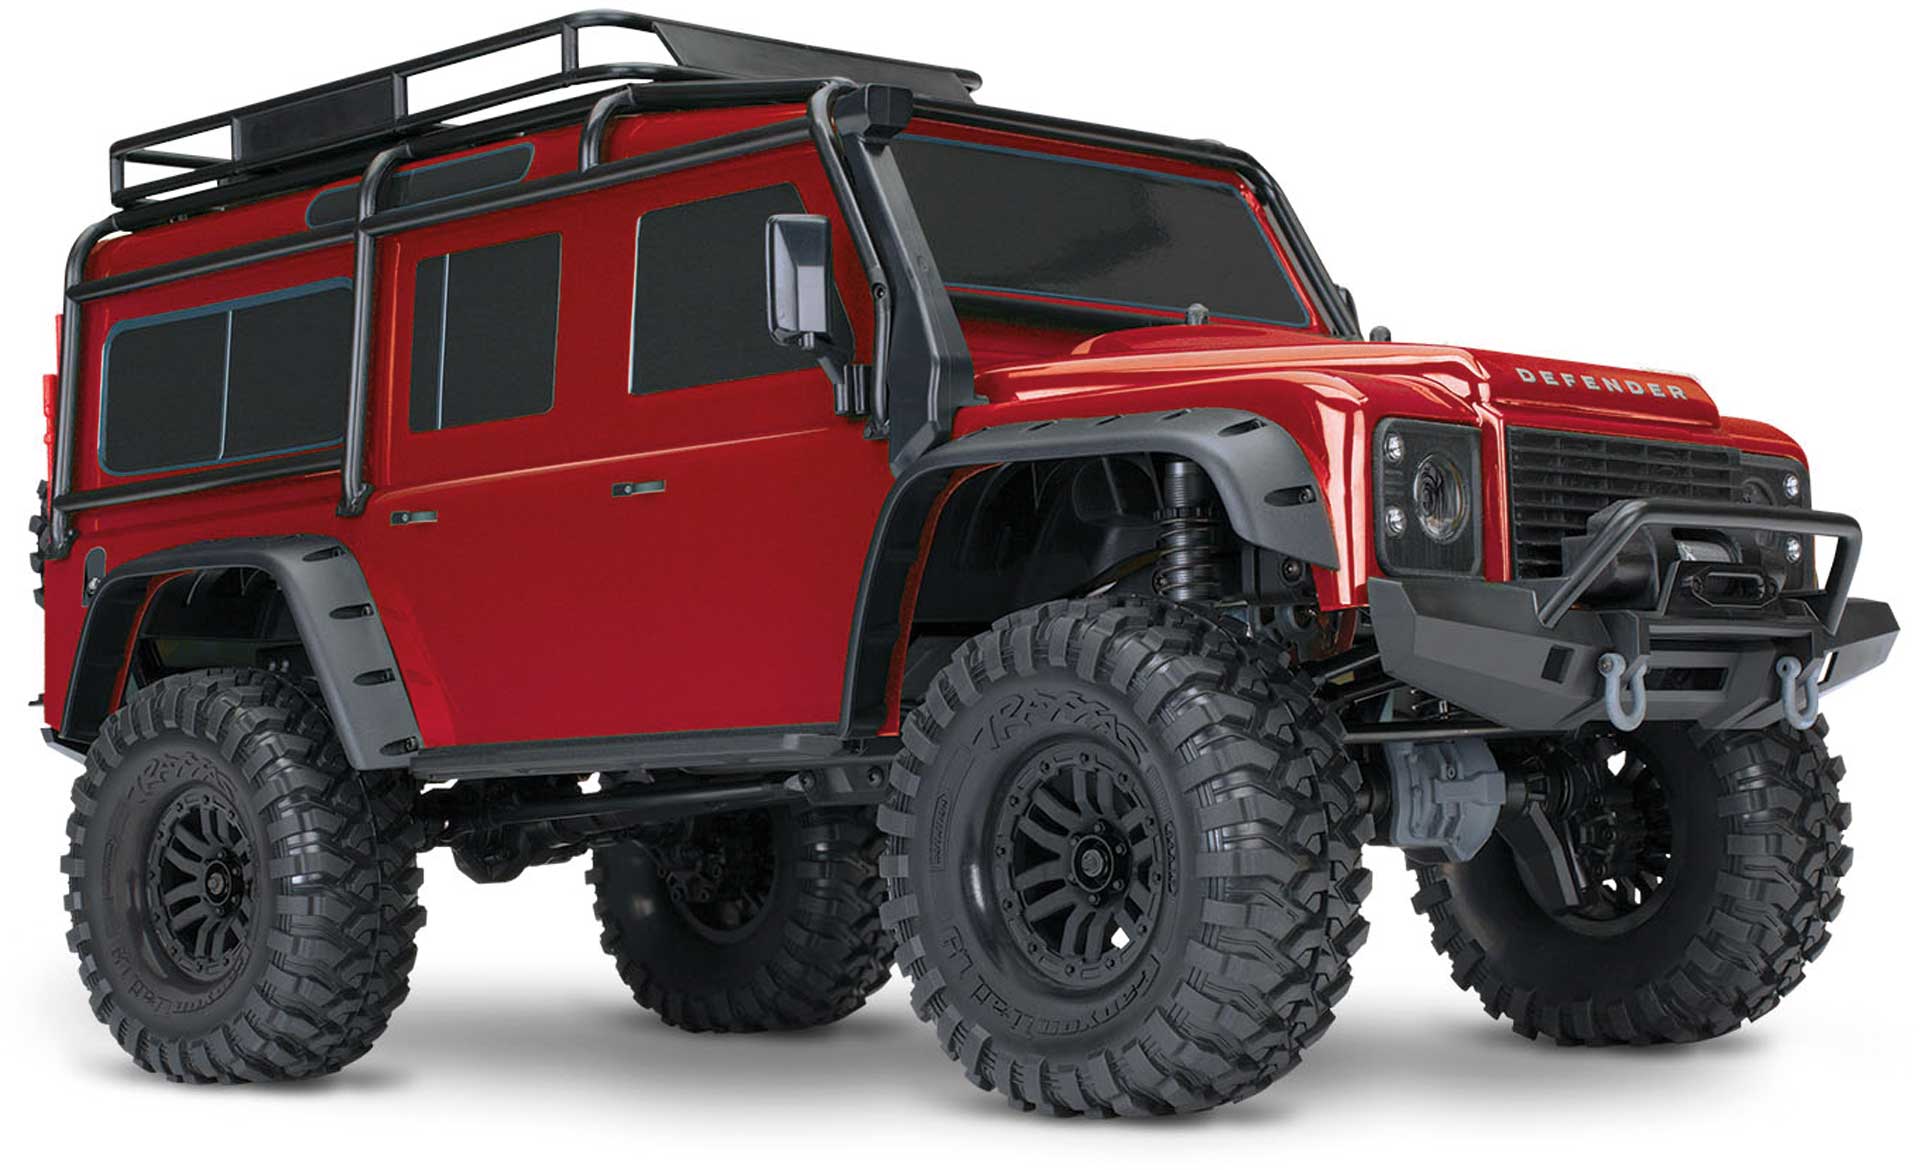 TRAXXAS TRX-4 LAND ROVER DEFENDER ROT 1/10 4X4 RTR SCALE CRAWLER BRUSHED